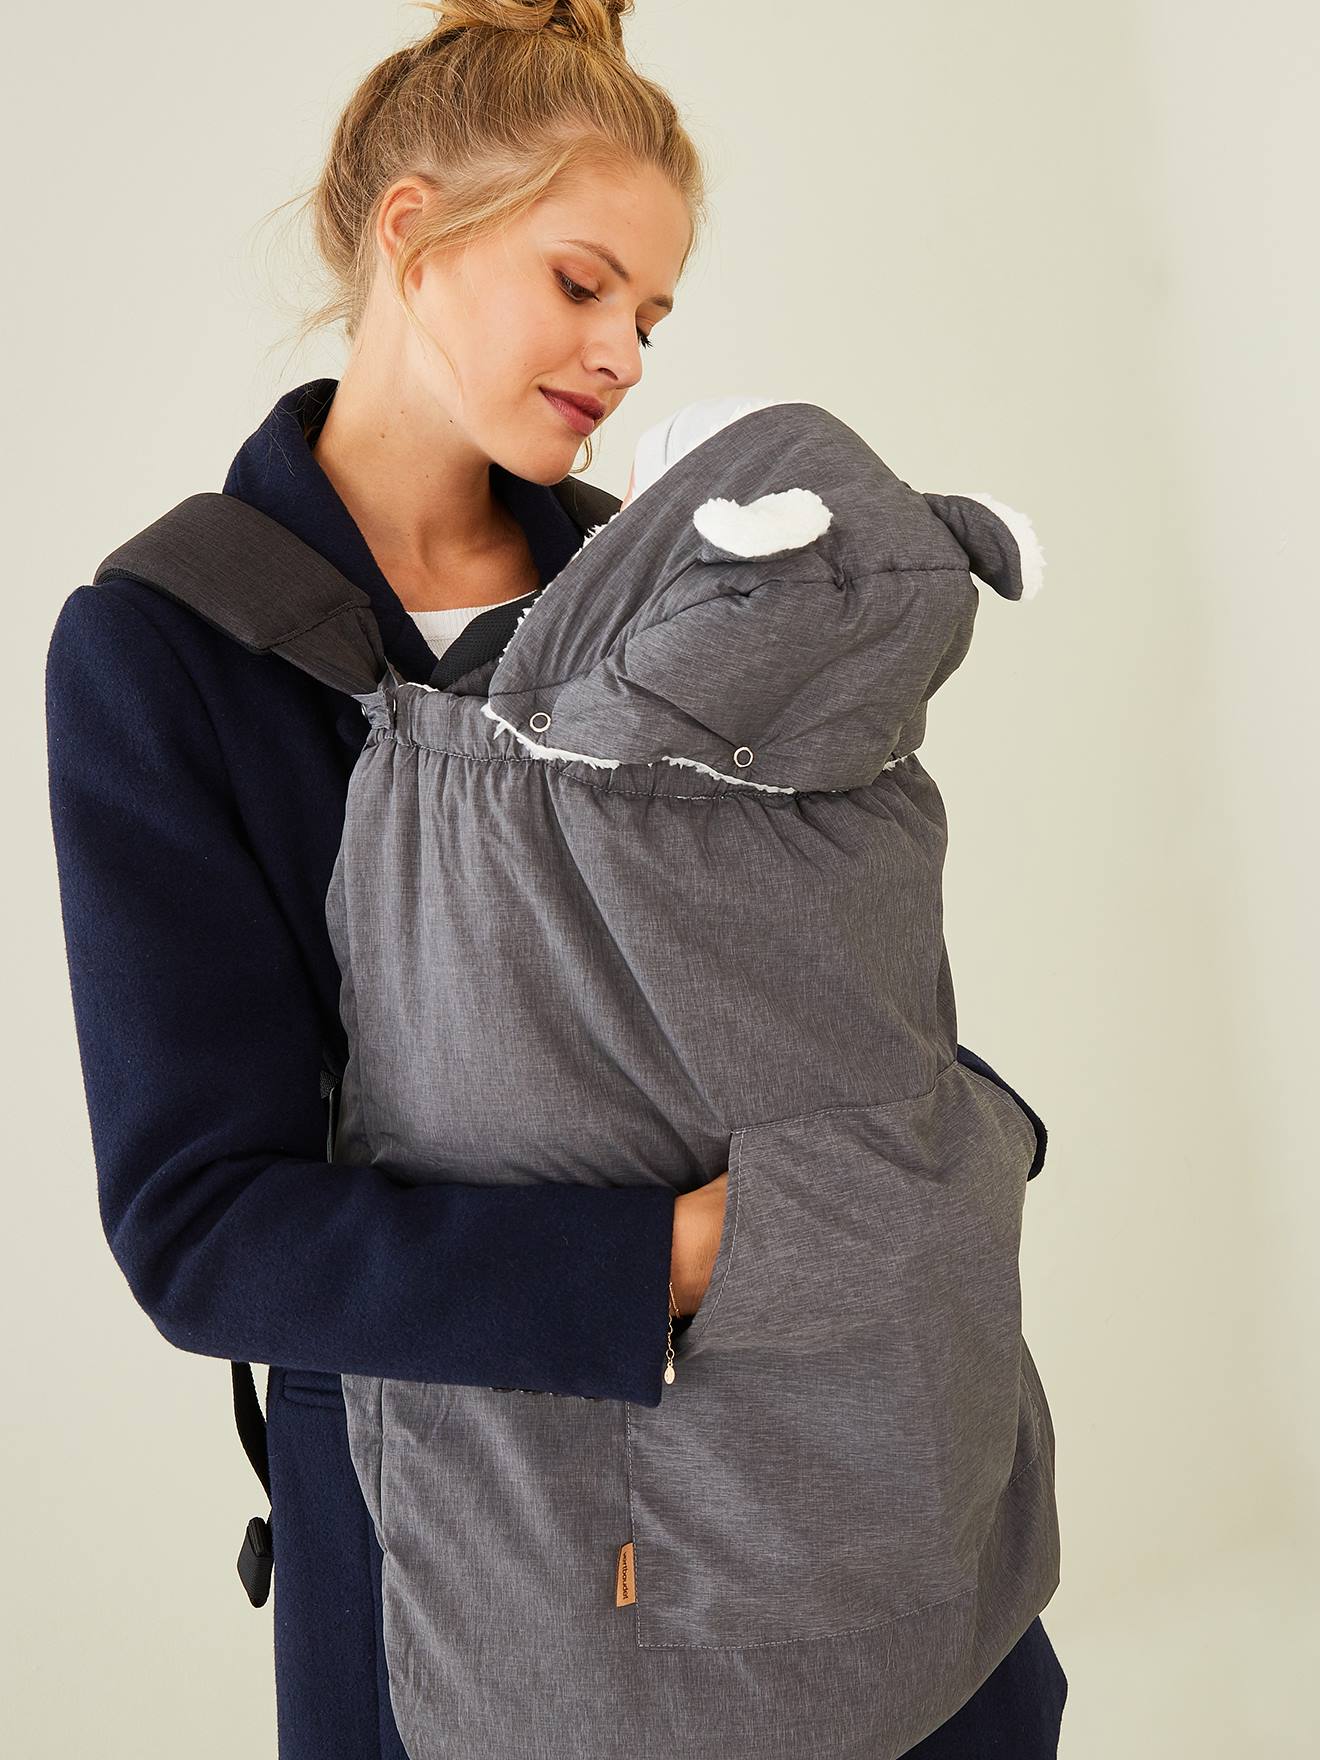 Baby Carrier Cover grey